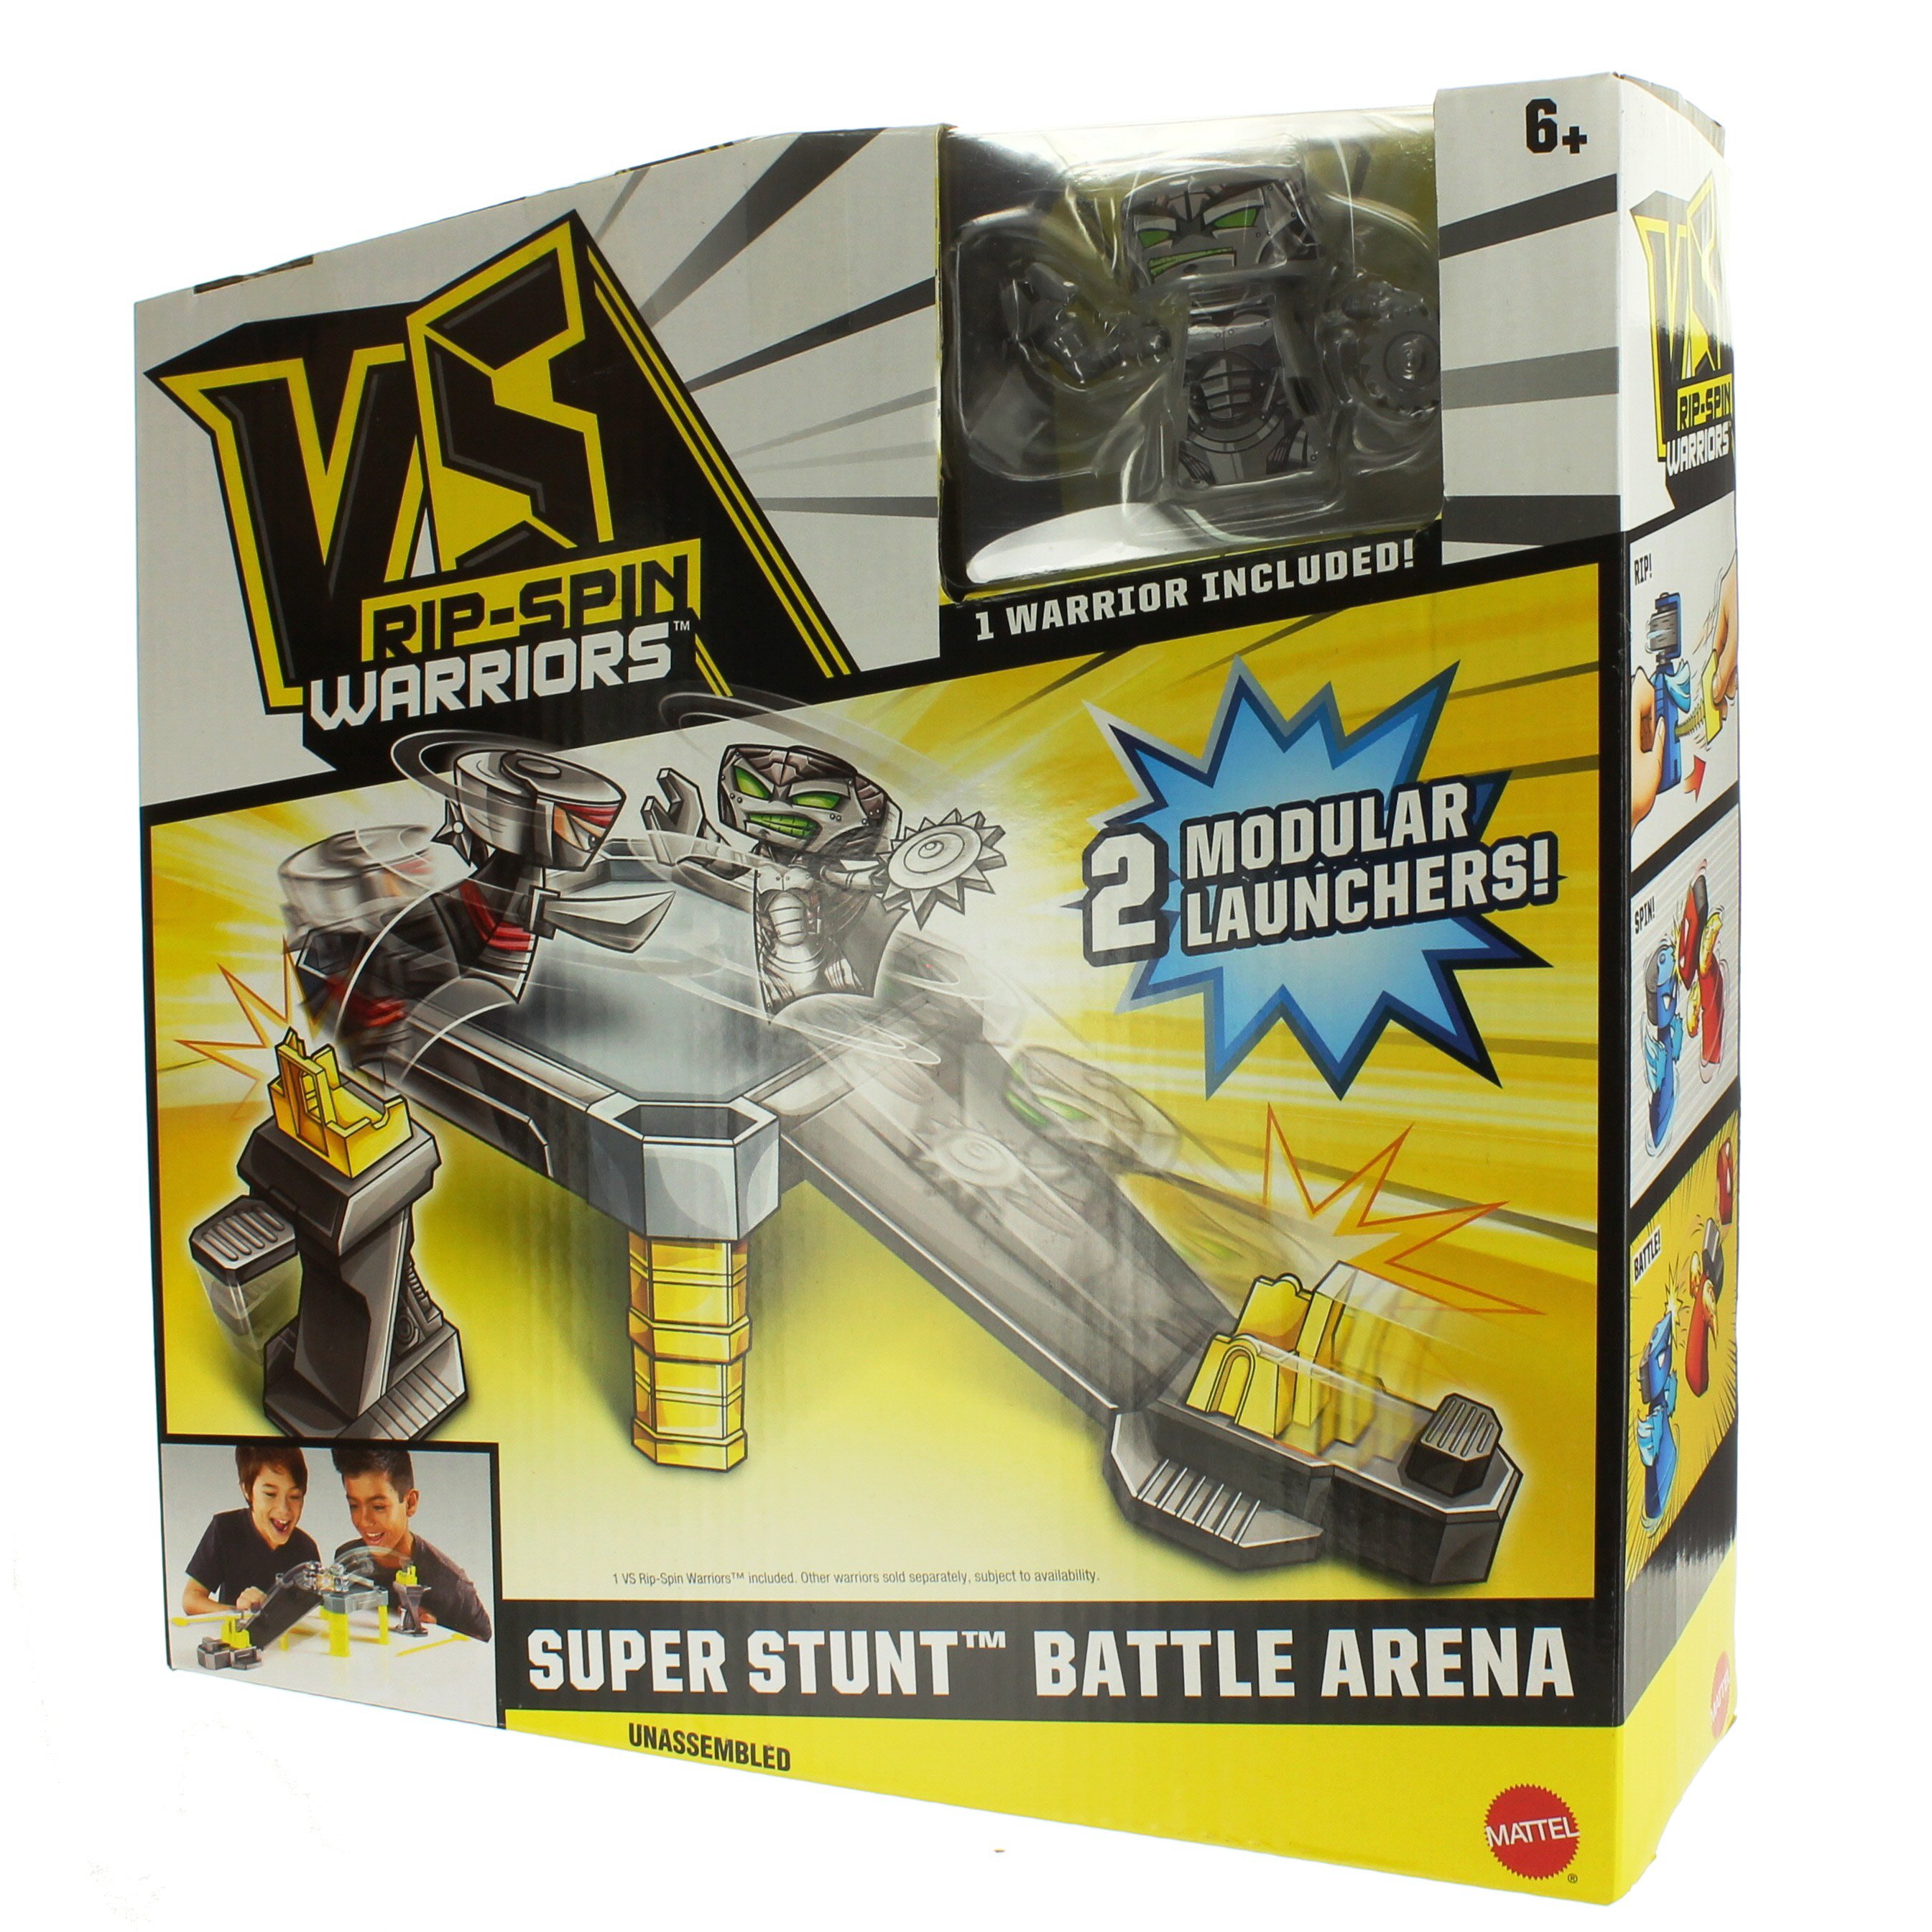 VS Rip-Spin Warriors Super Stunt Battle Arena By Mattel 2016 CONNECT & BUILD new 